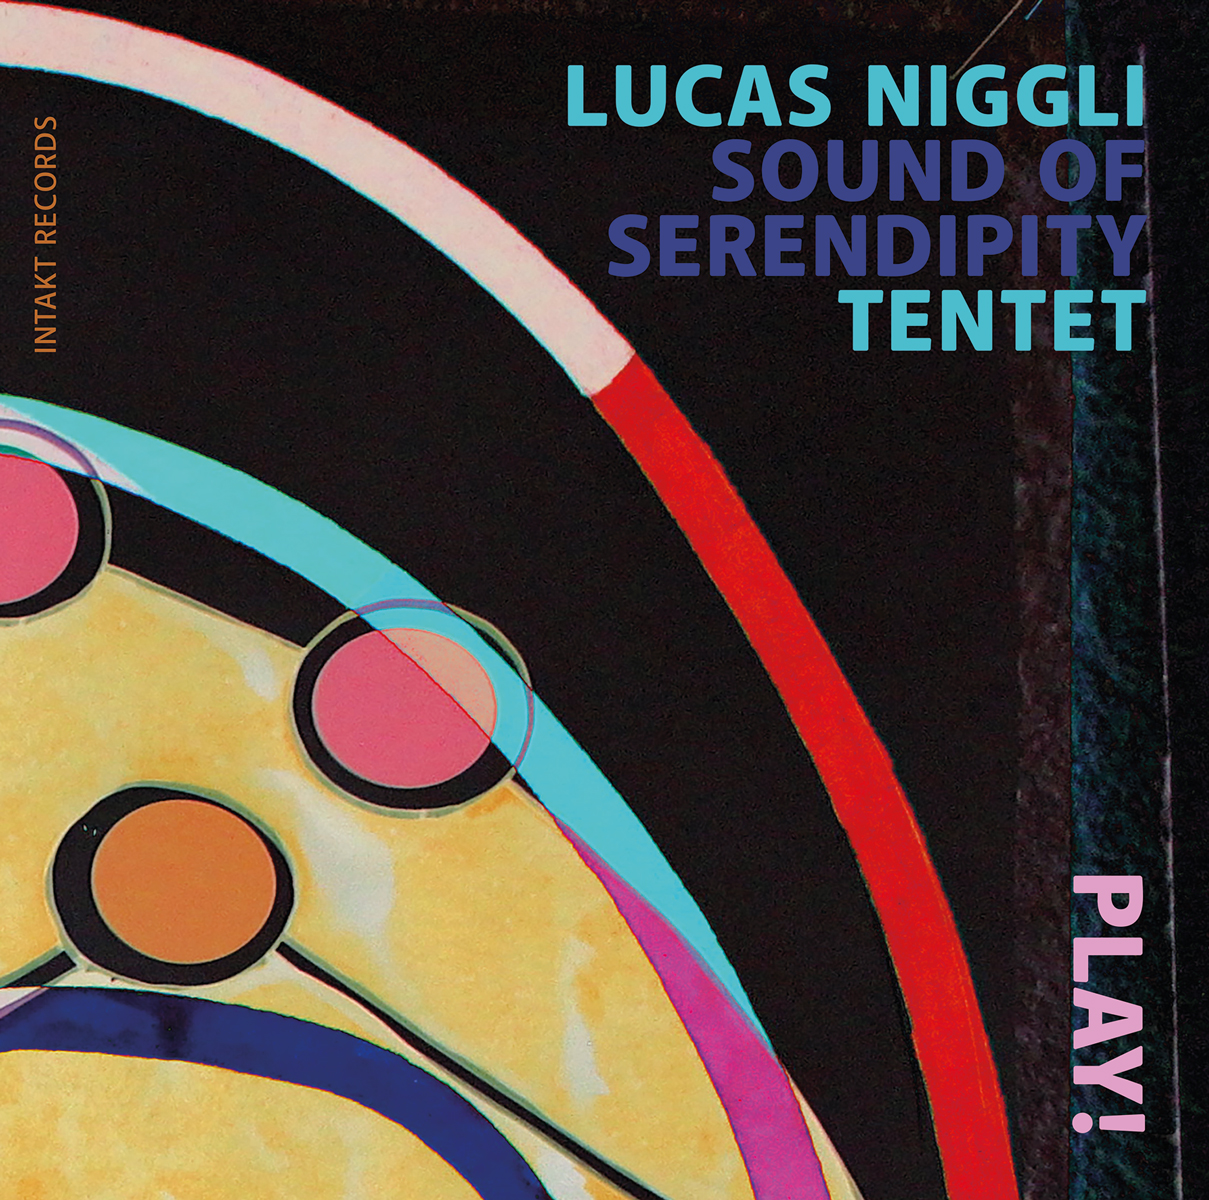 LUCAS NIGGLISOUND OF SERENDIPITY TENTETPLAY! cover front